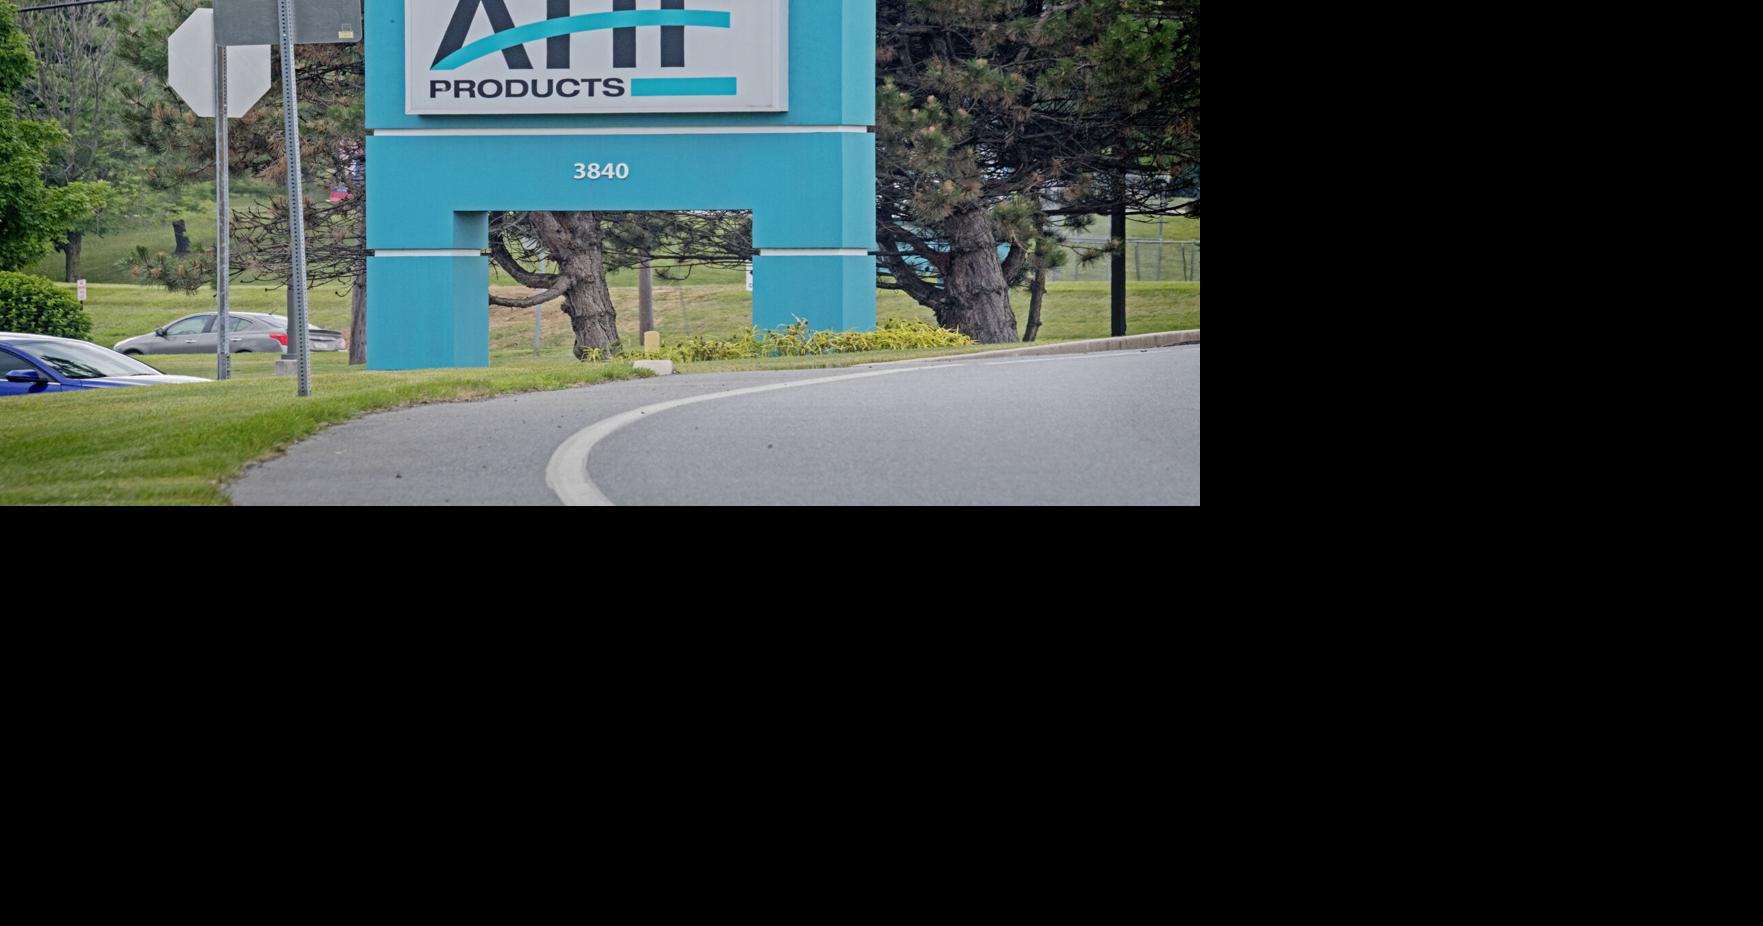 AHF Products to close western Pa. plant | Local Business